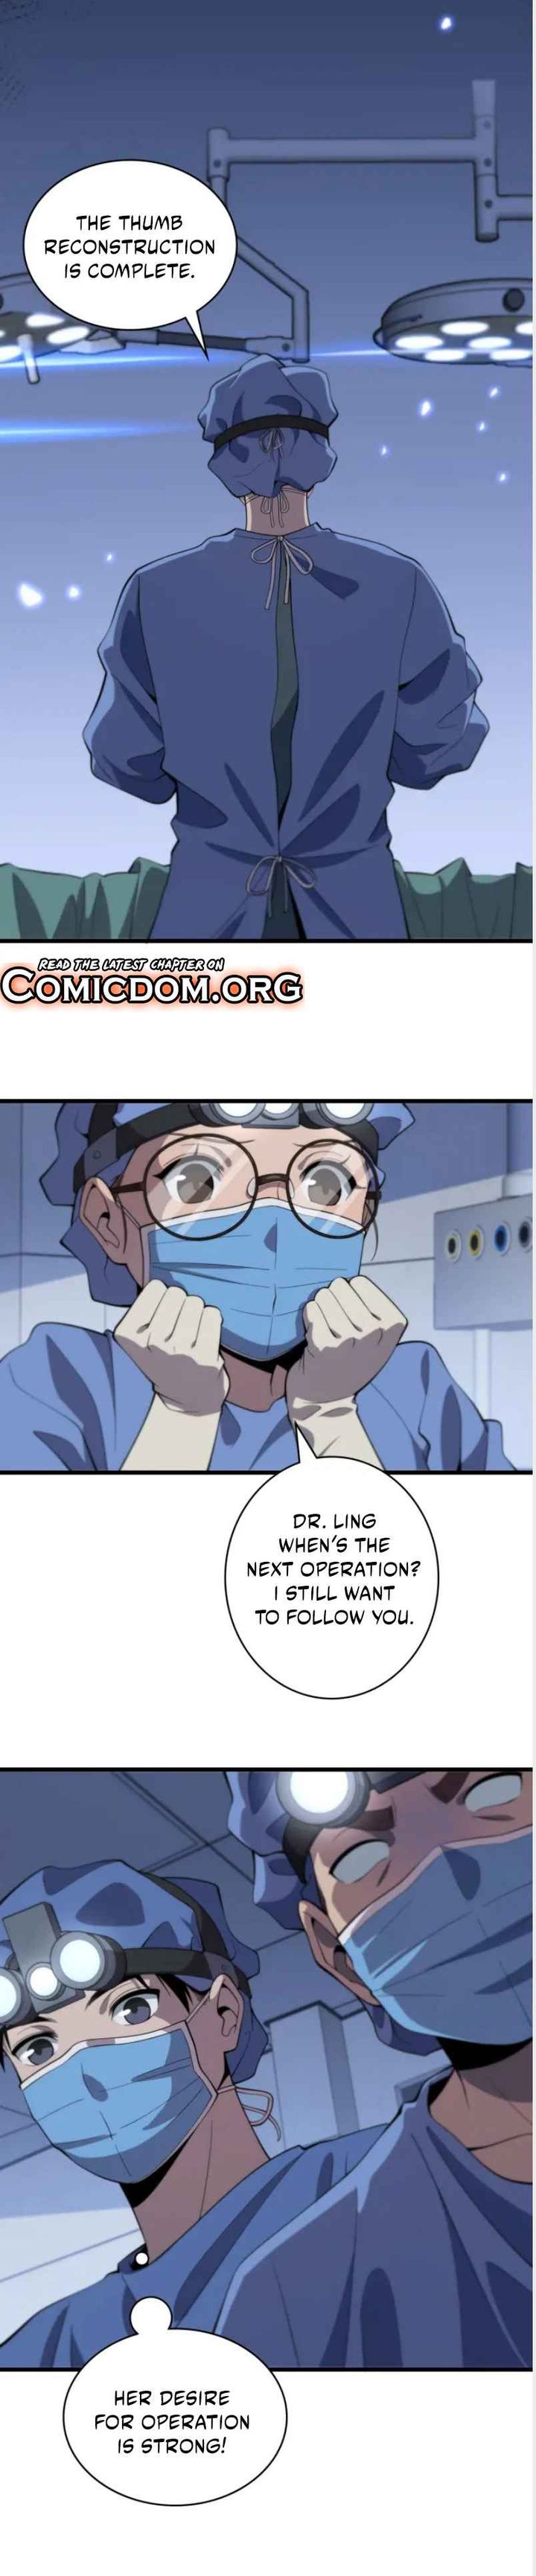 great_doctor_ling_ran_64_11